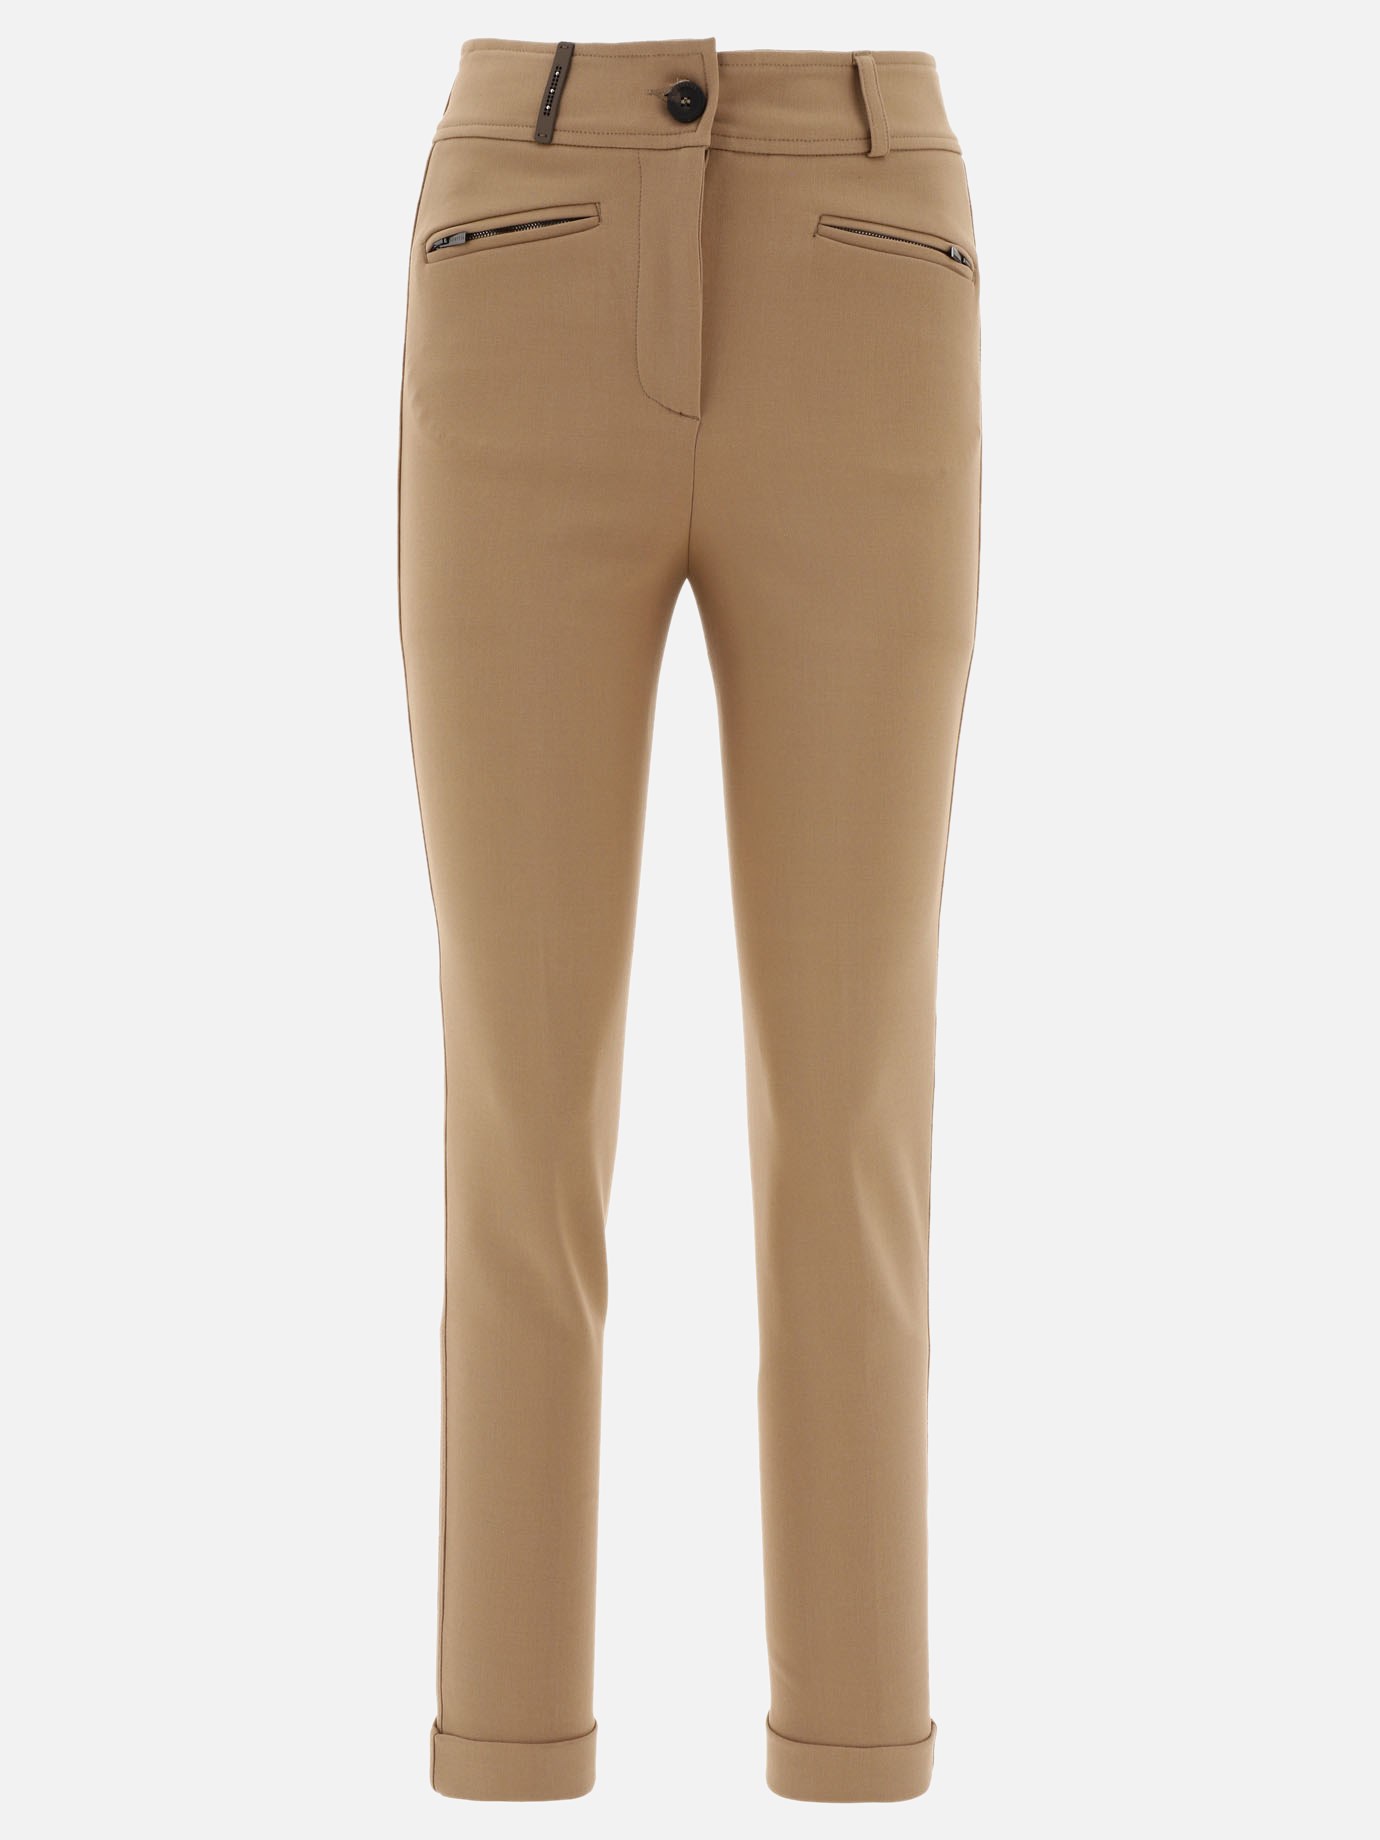 Trousers featuring zipped pockets